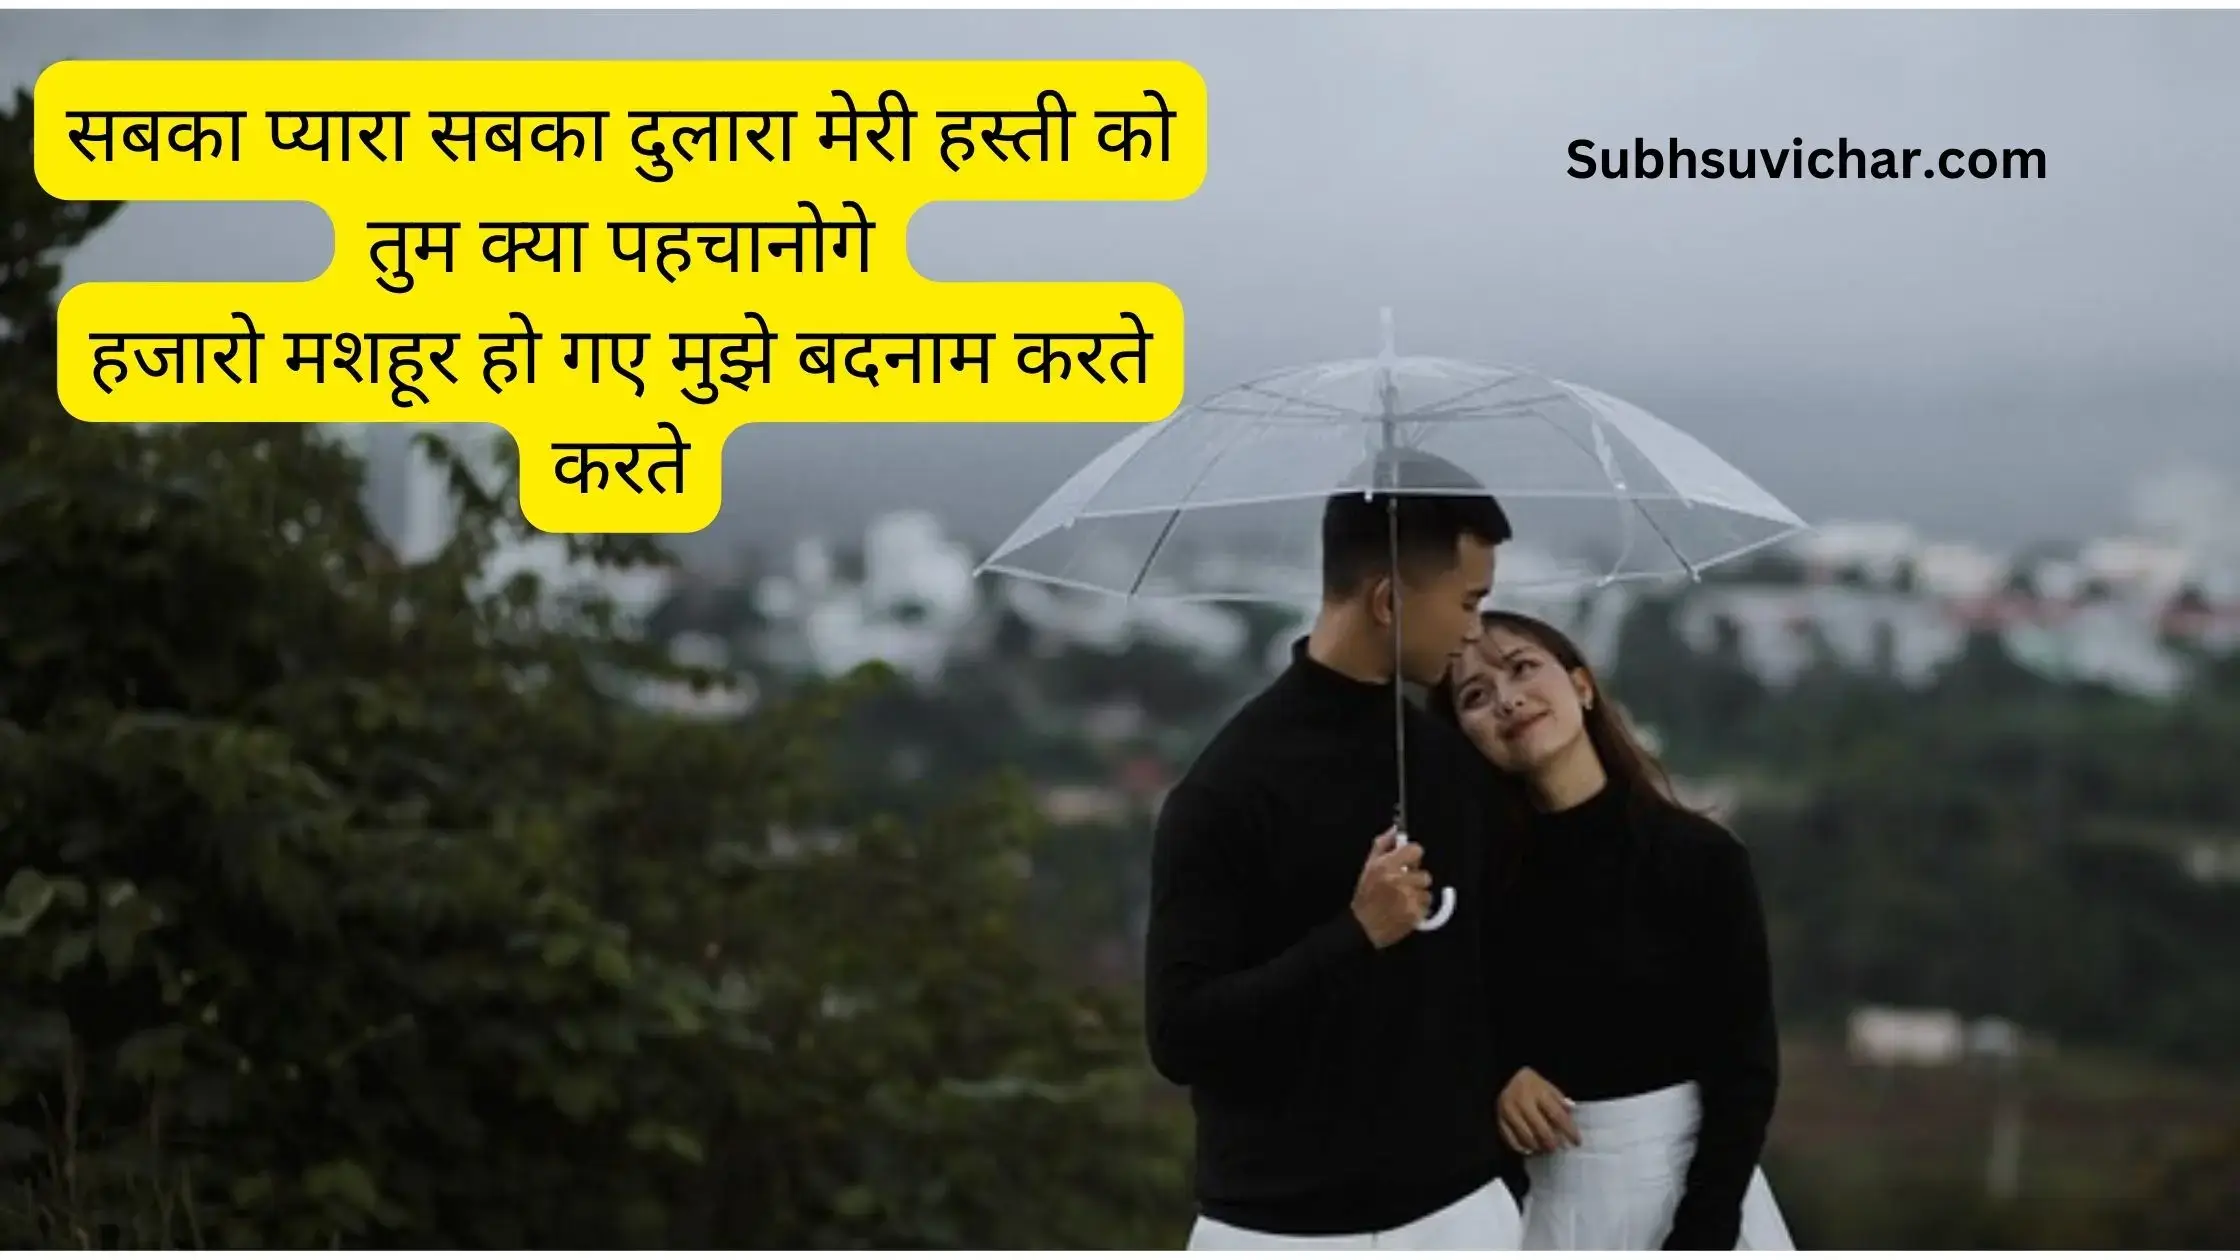 This post contains huge collection of shayari in hindi font with high quality shayari photo for your whatsapp and facebook status.